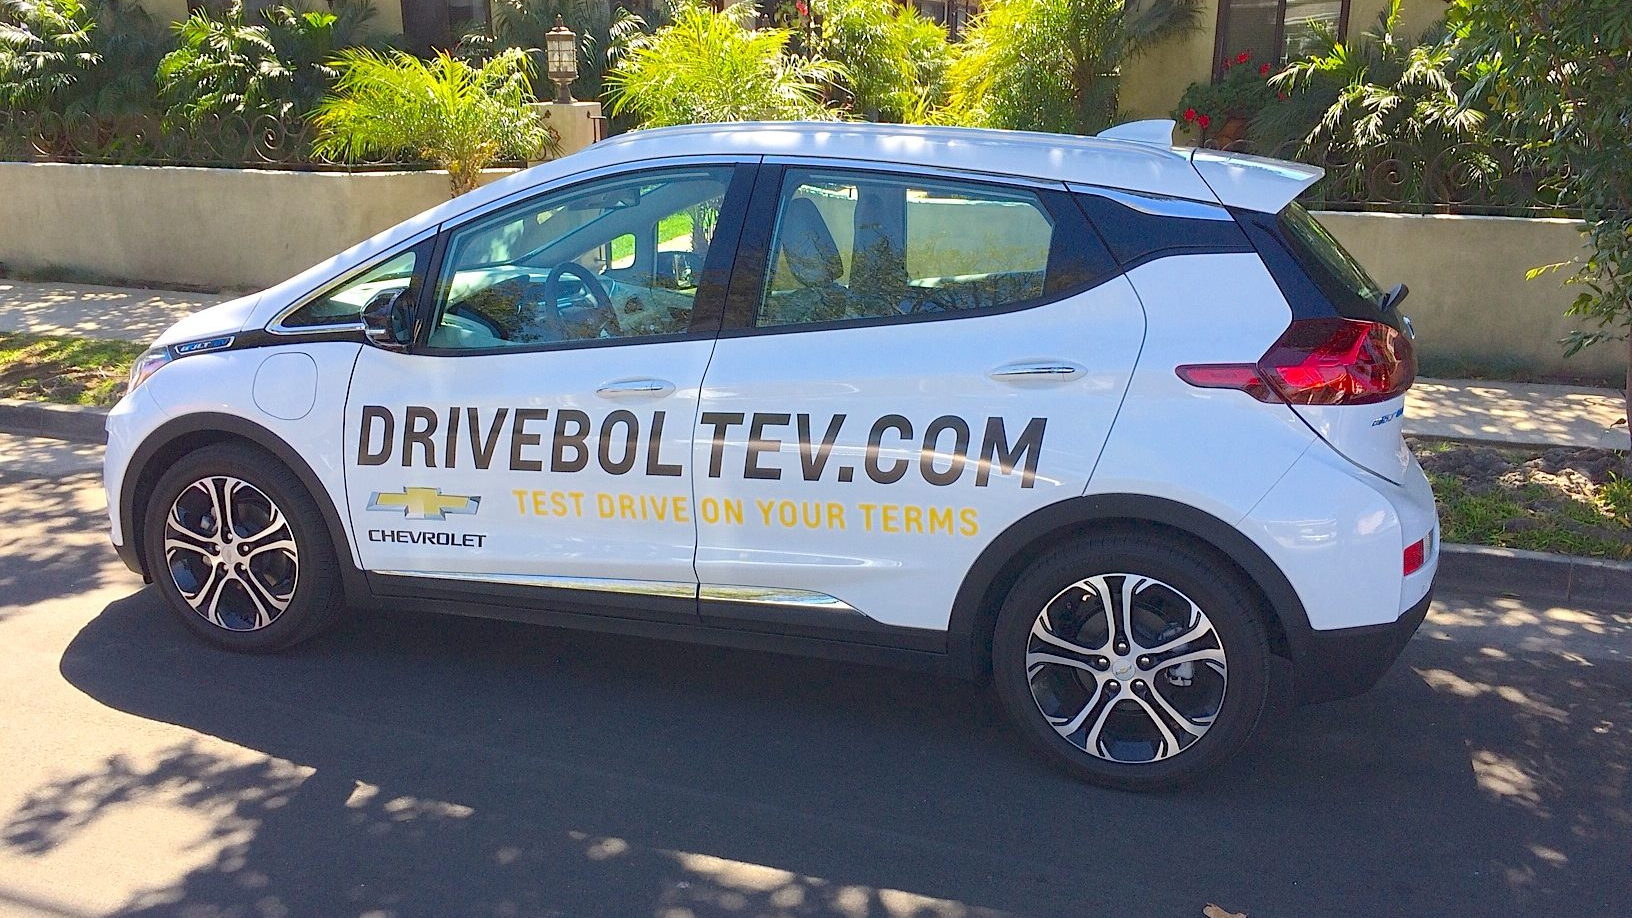 2017 Chevrolet Bolt EV electric car, brought to Kelly Olsen's house for test drive, March 2017